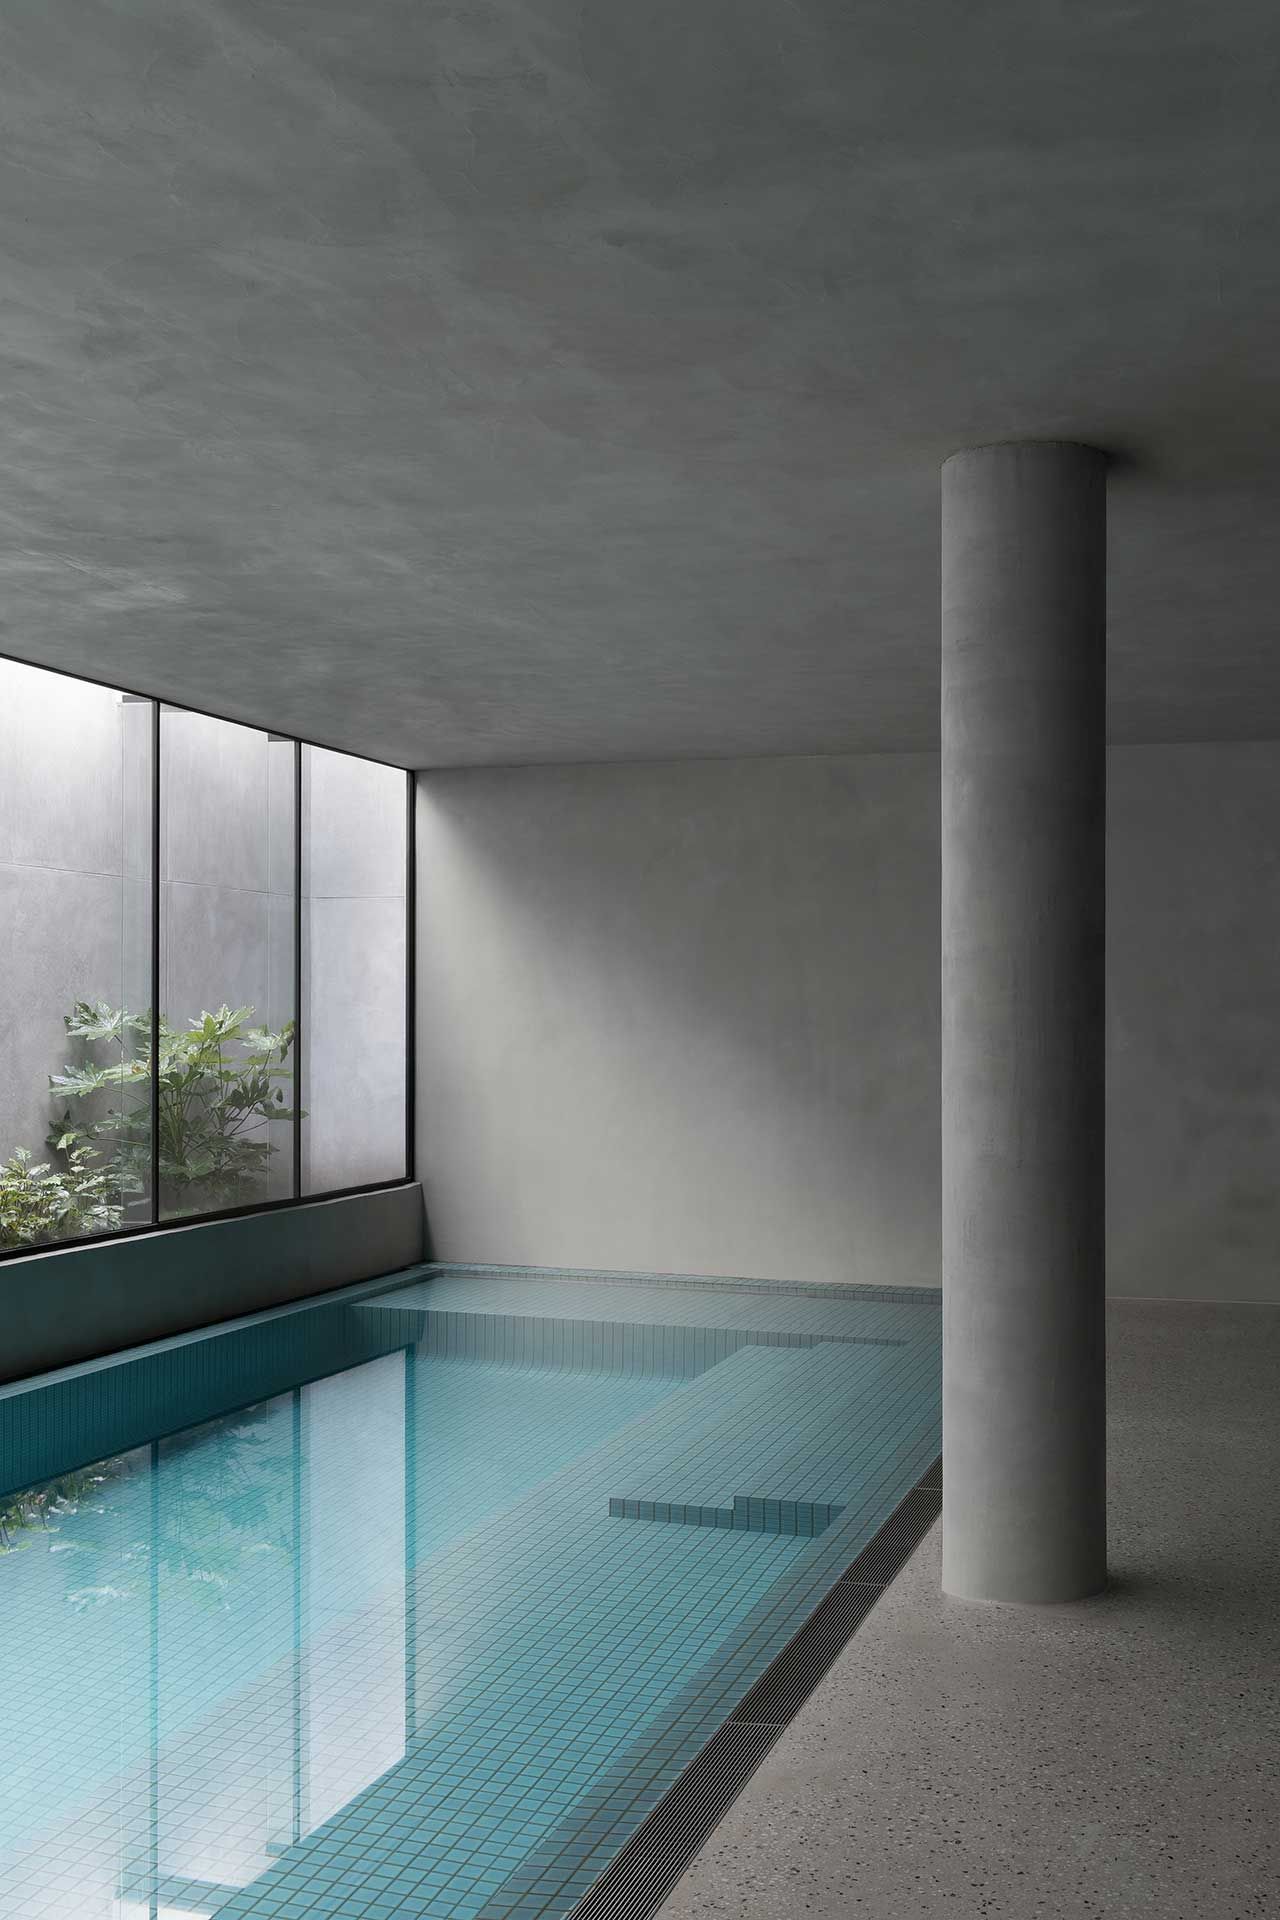 Discover the Benefits of Having an Indoor
Pool in Your Home